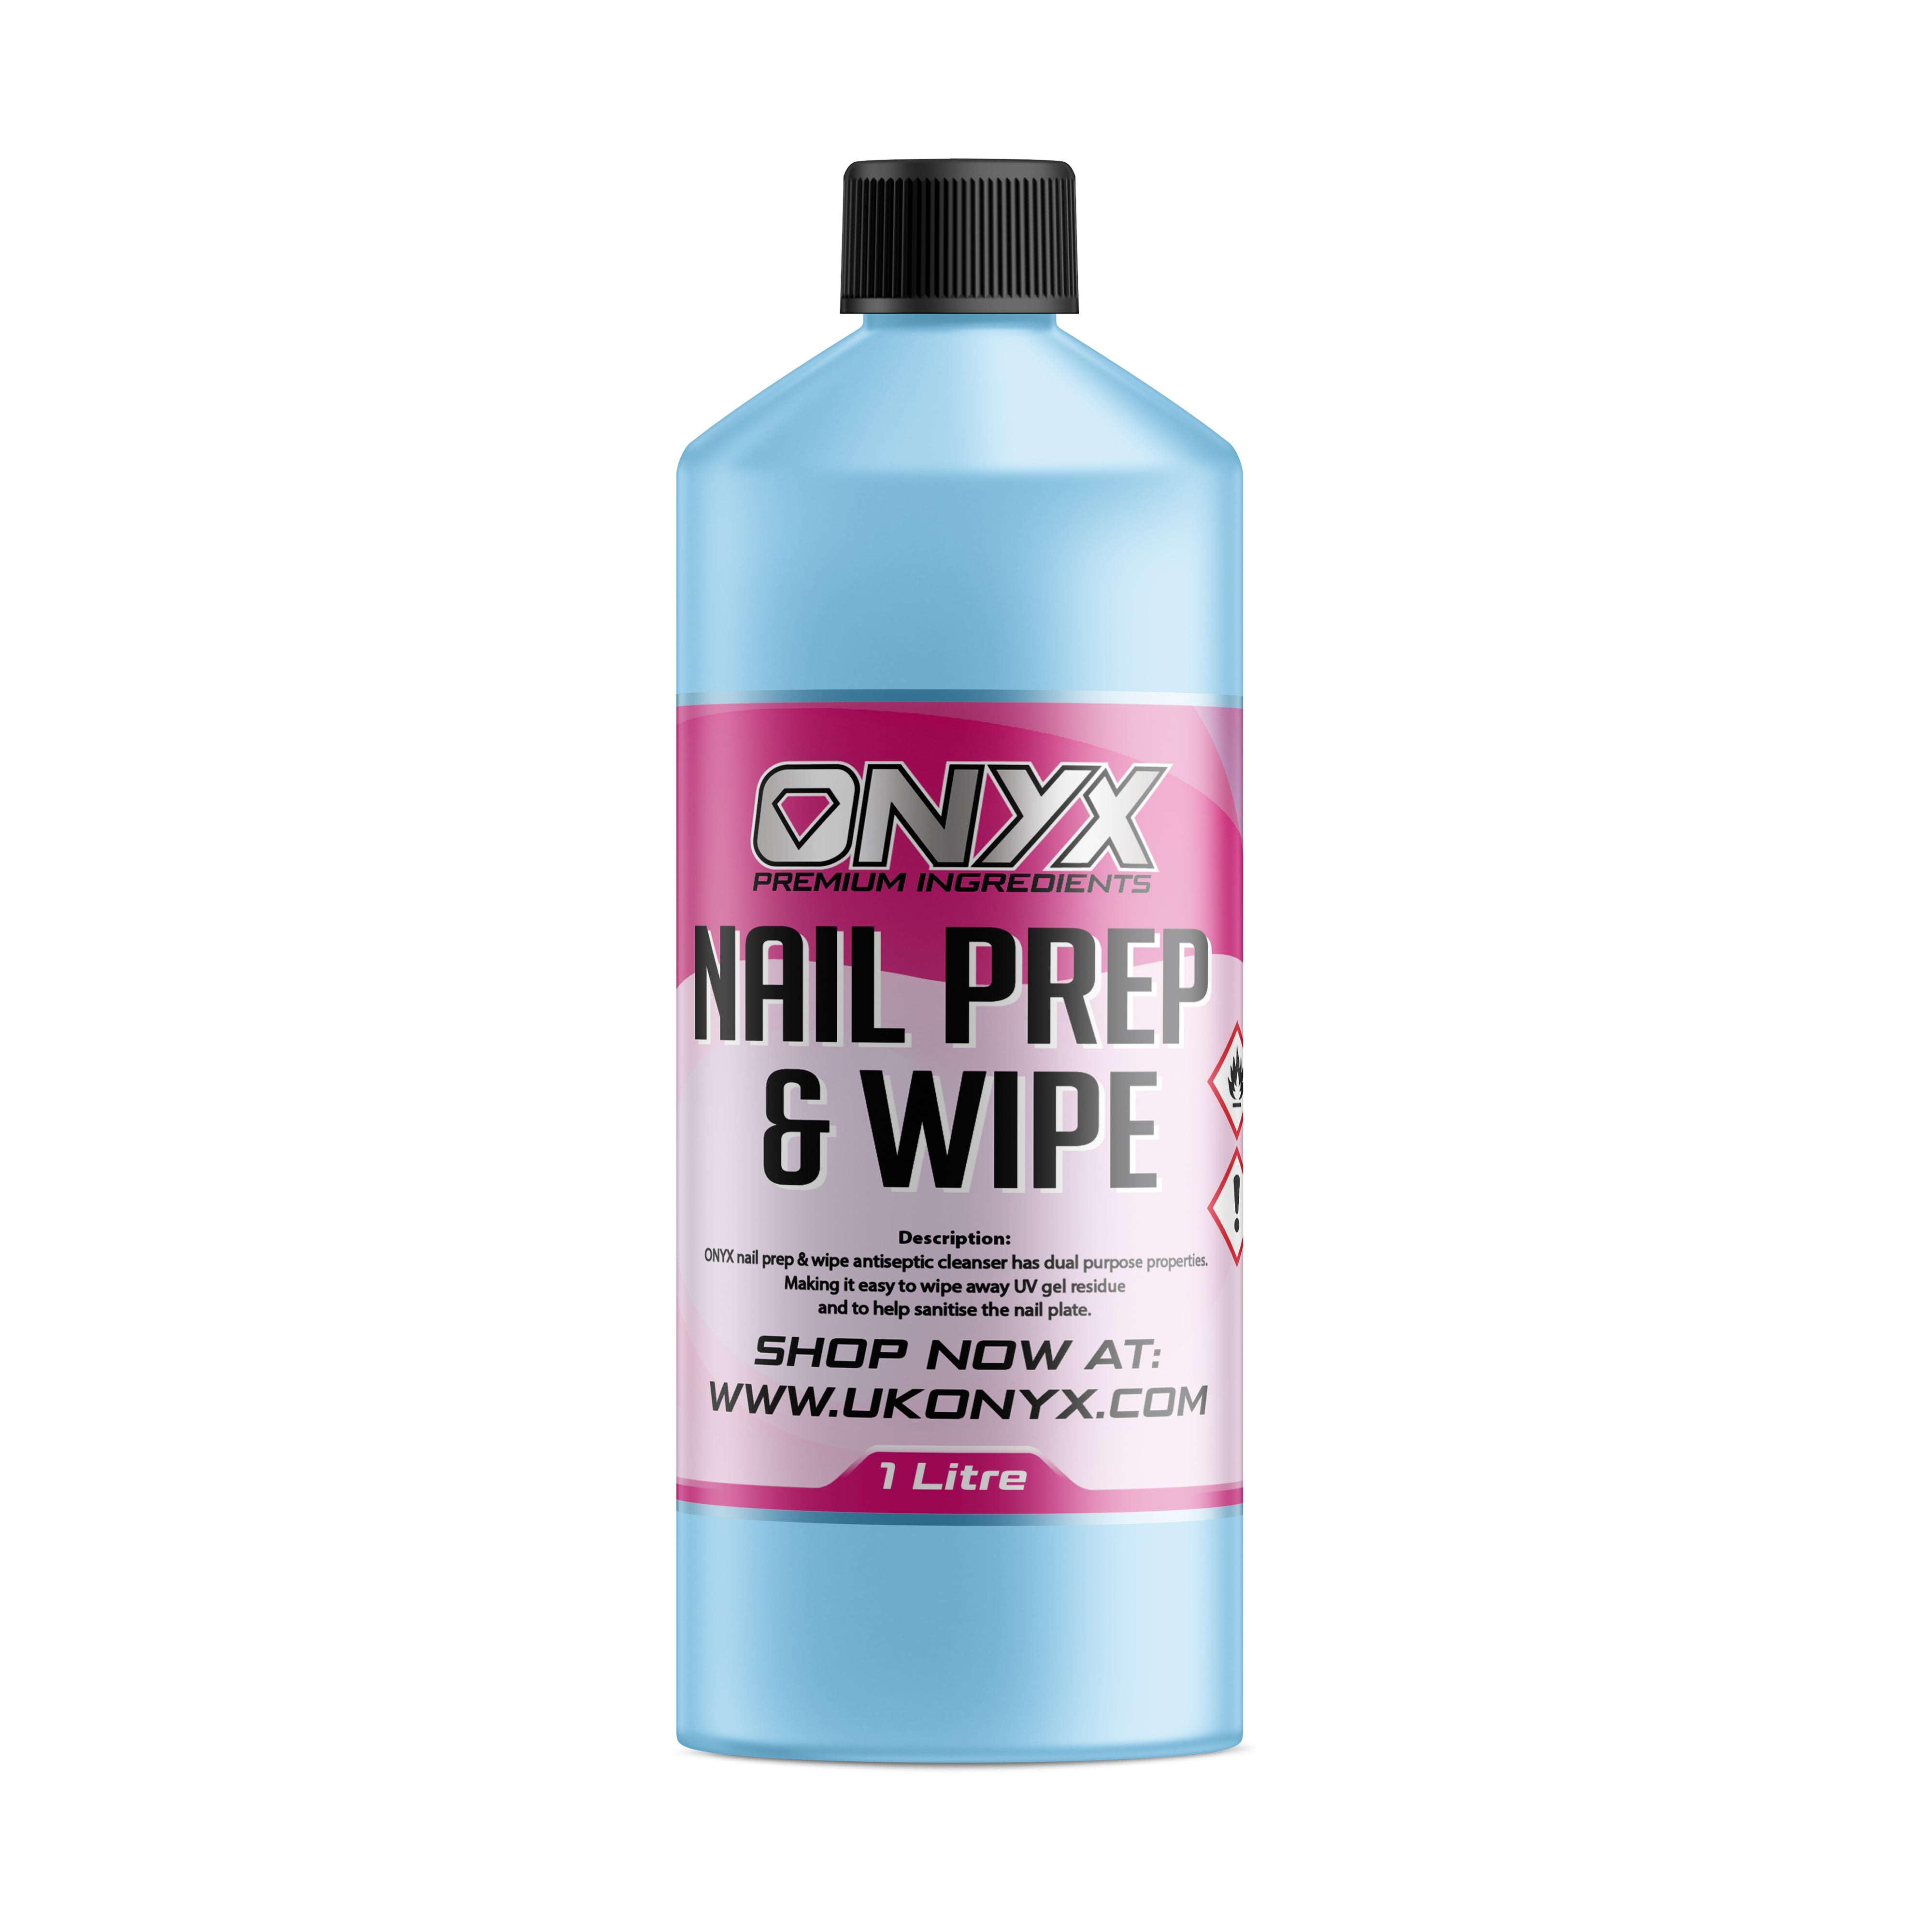 ONYX Nail Prep & Wipe 1 Litre antiseptic nail cleansing solution for professional and personal use